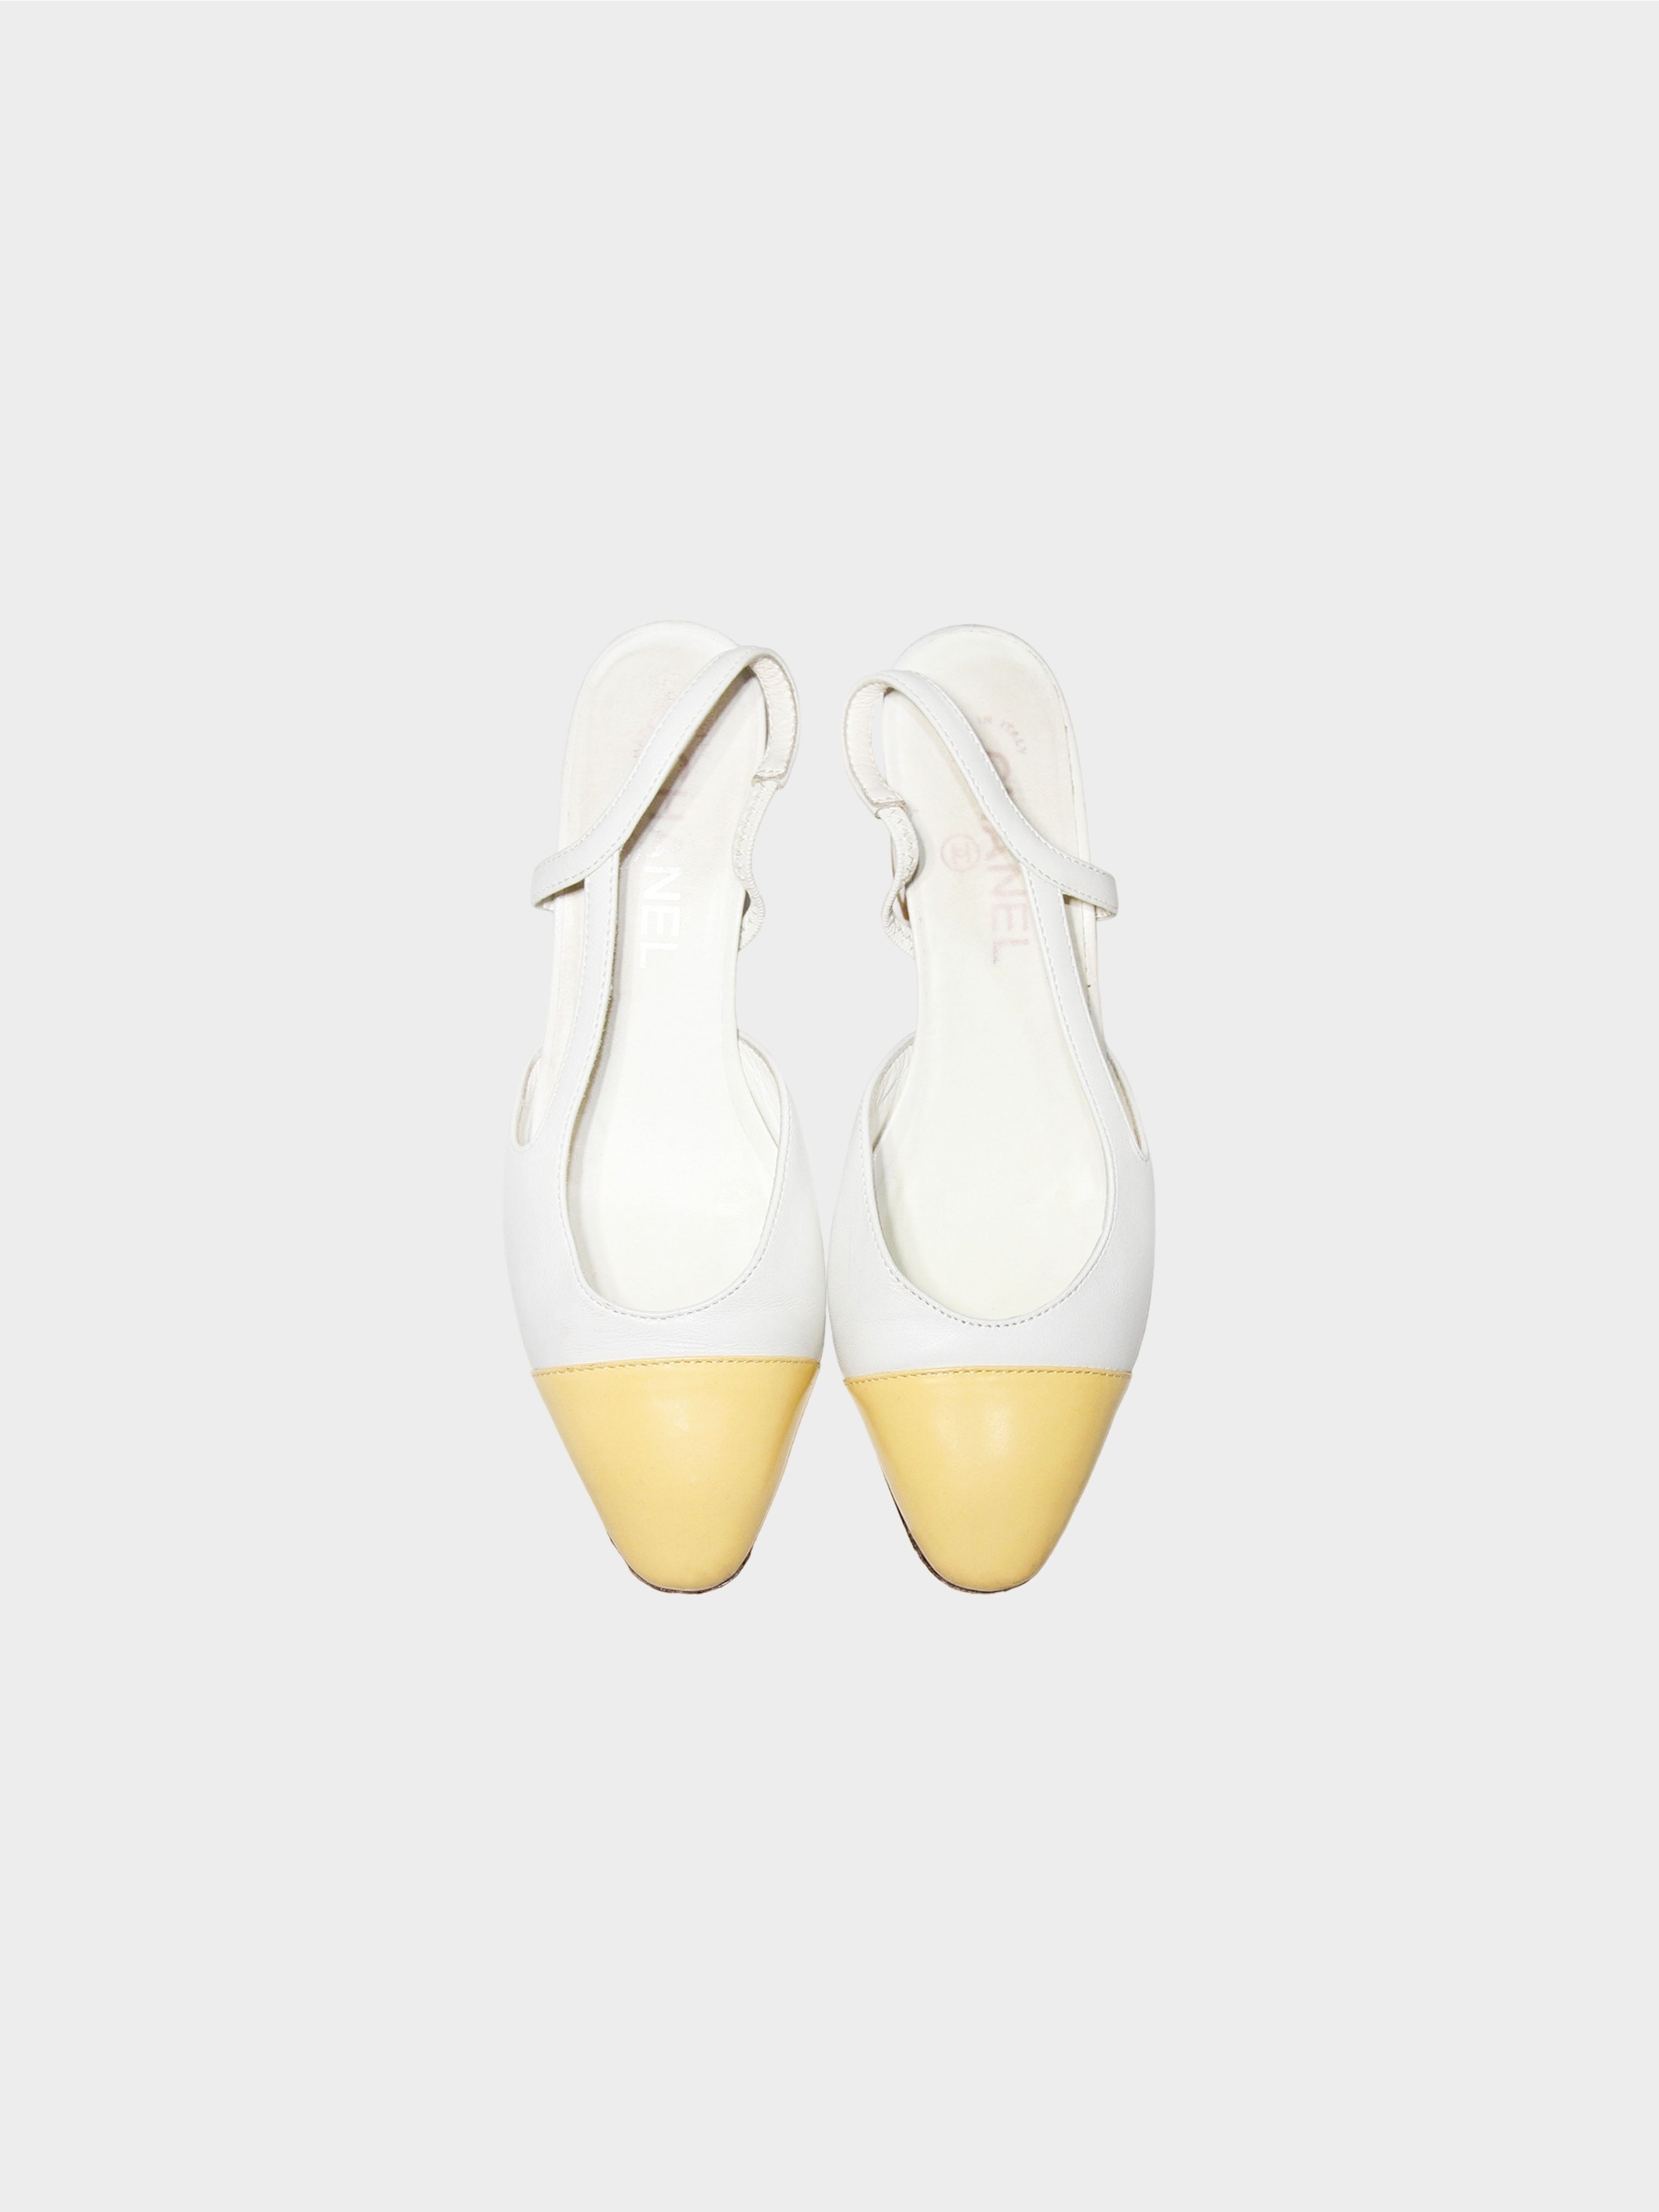 Chanel 2010s Off White and Beige Two-toned Slingback Pumps